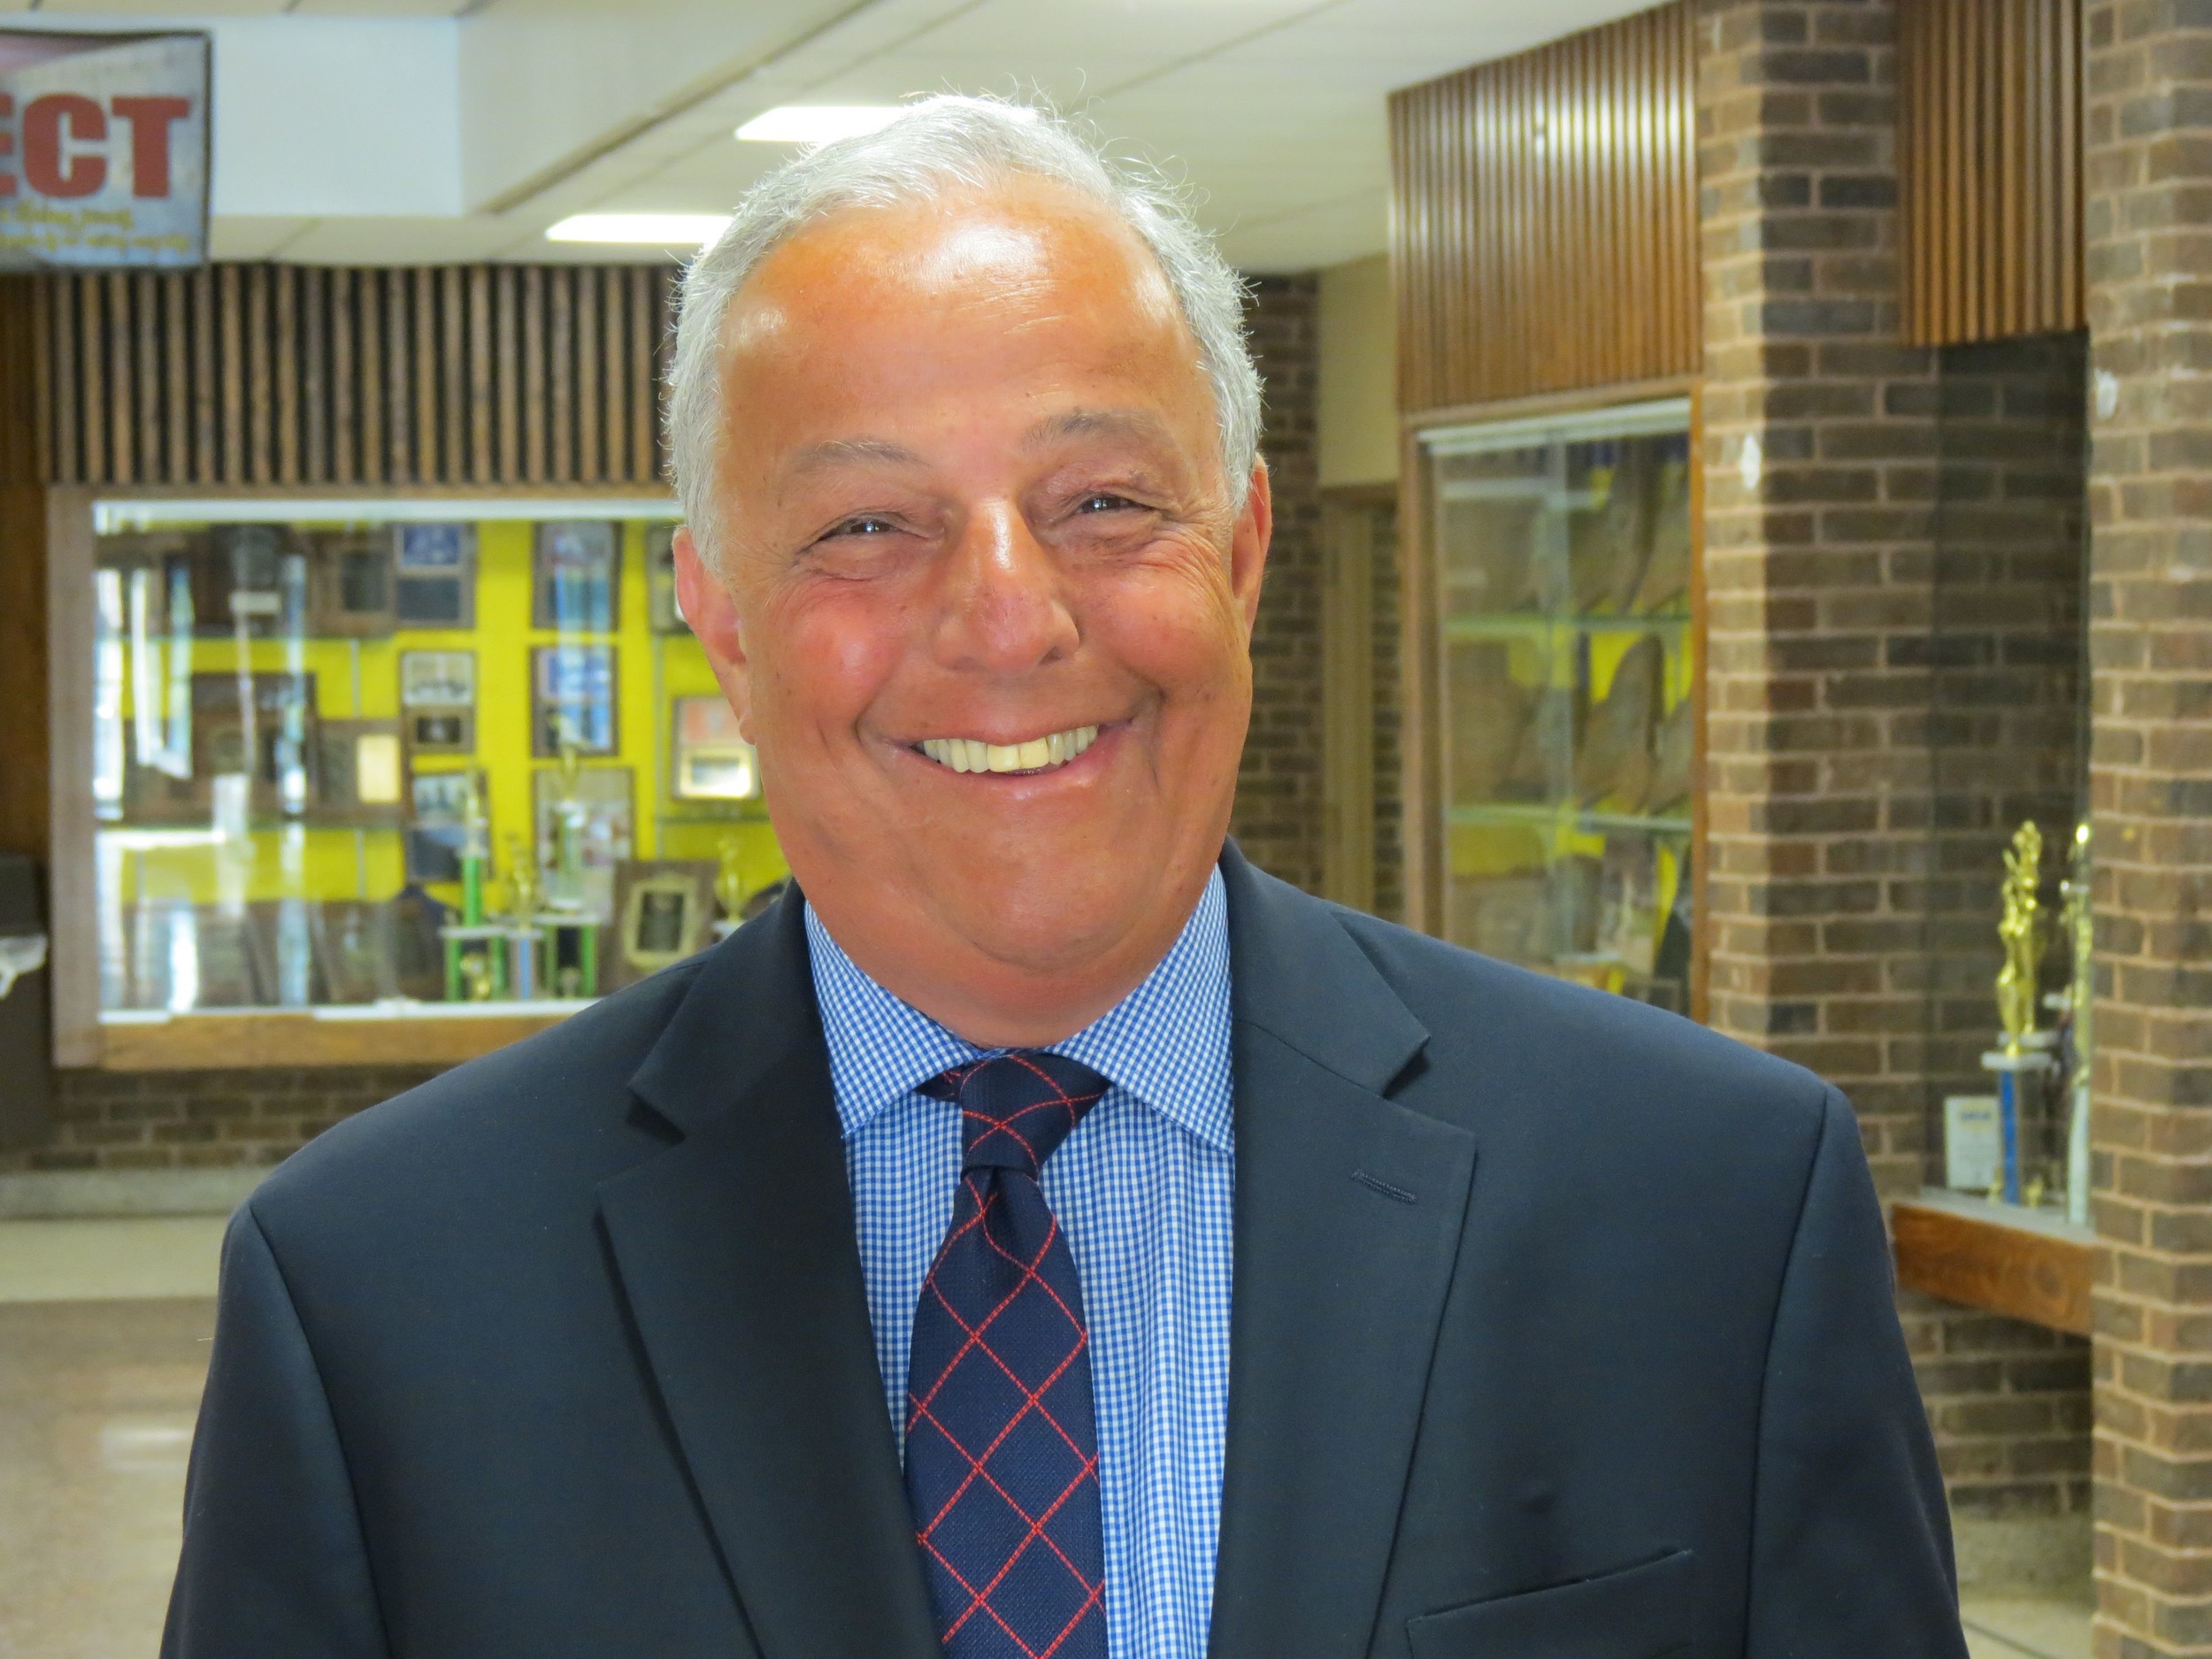 Neil Lederer was named the interim principal of East Rockaway Junior-Senior High School on Aug. 8. He has been a teacher and administrator in several districts for more than 50 years.